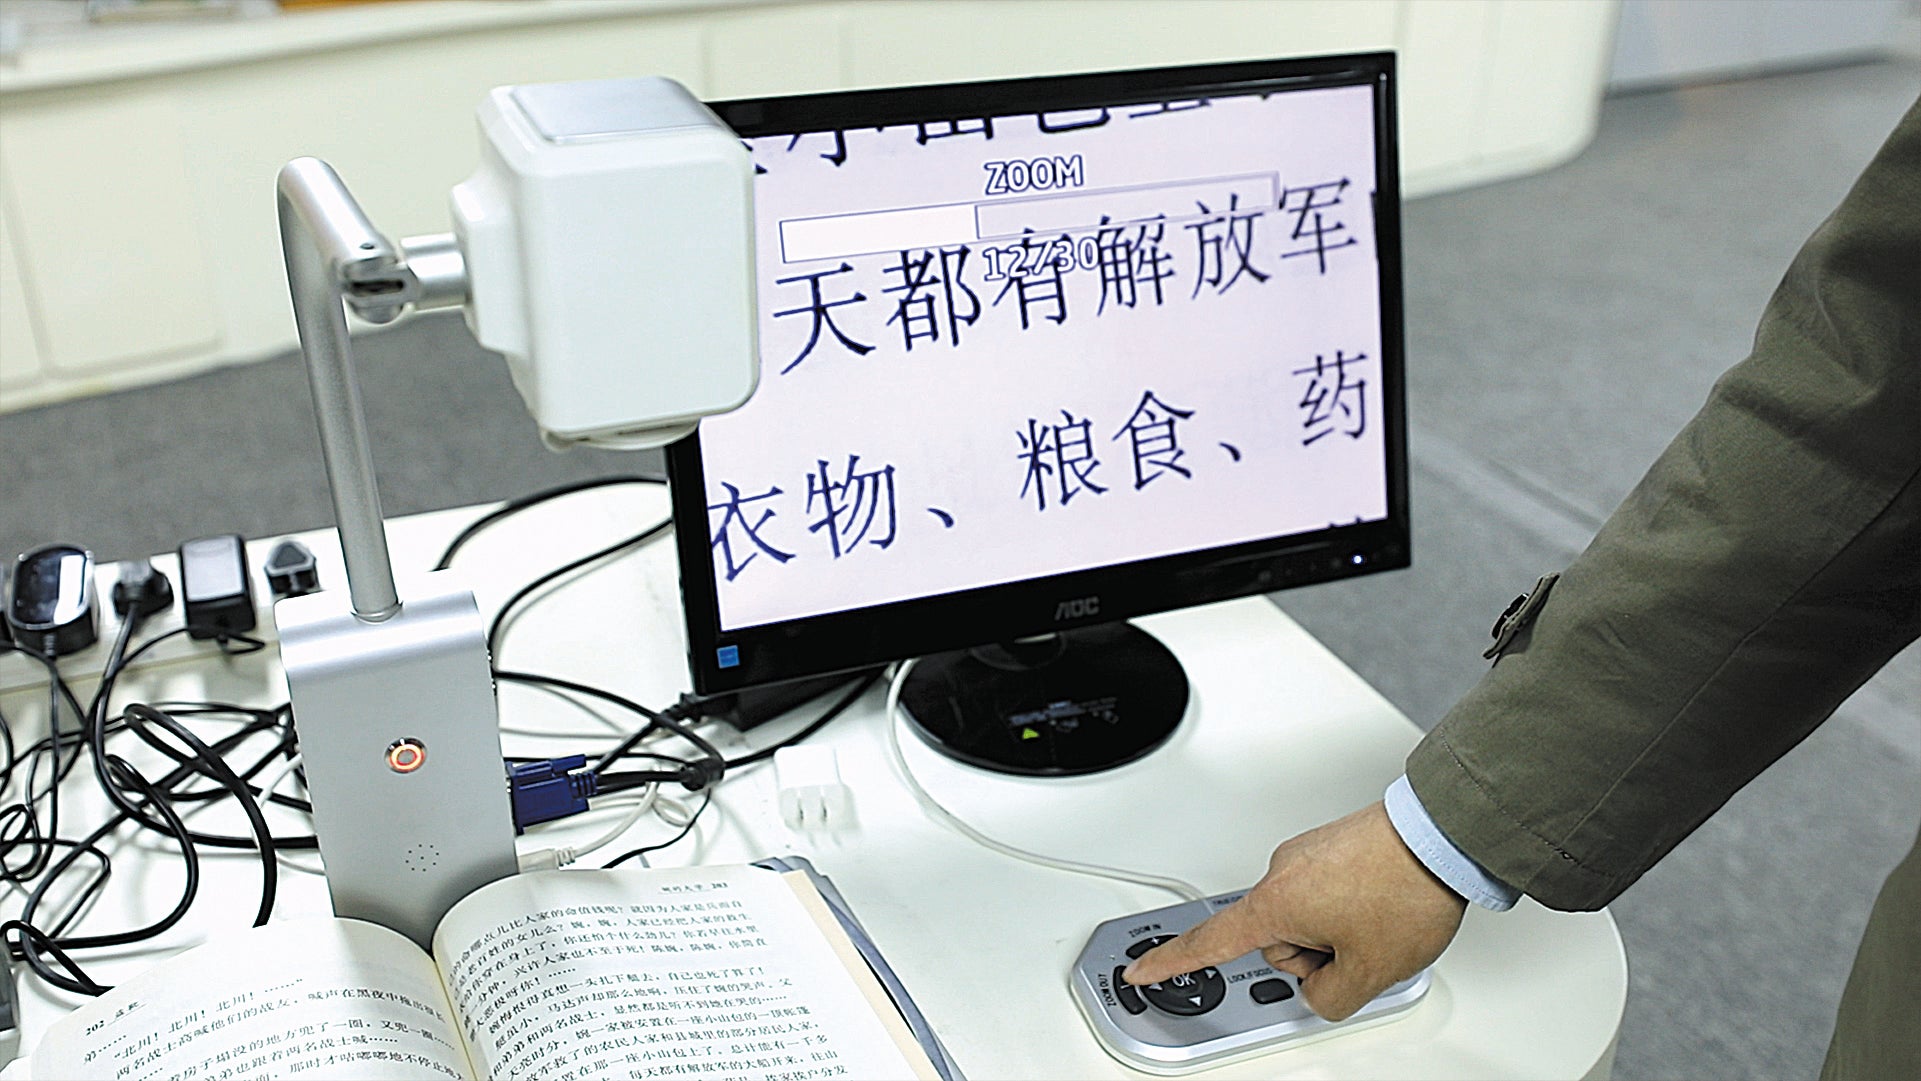 A device to help readers with weak eyesight read. It puts books under a camera that magnifies the text on a bigger screen